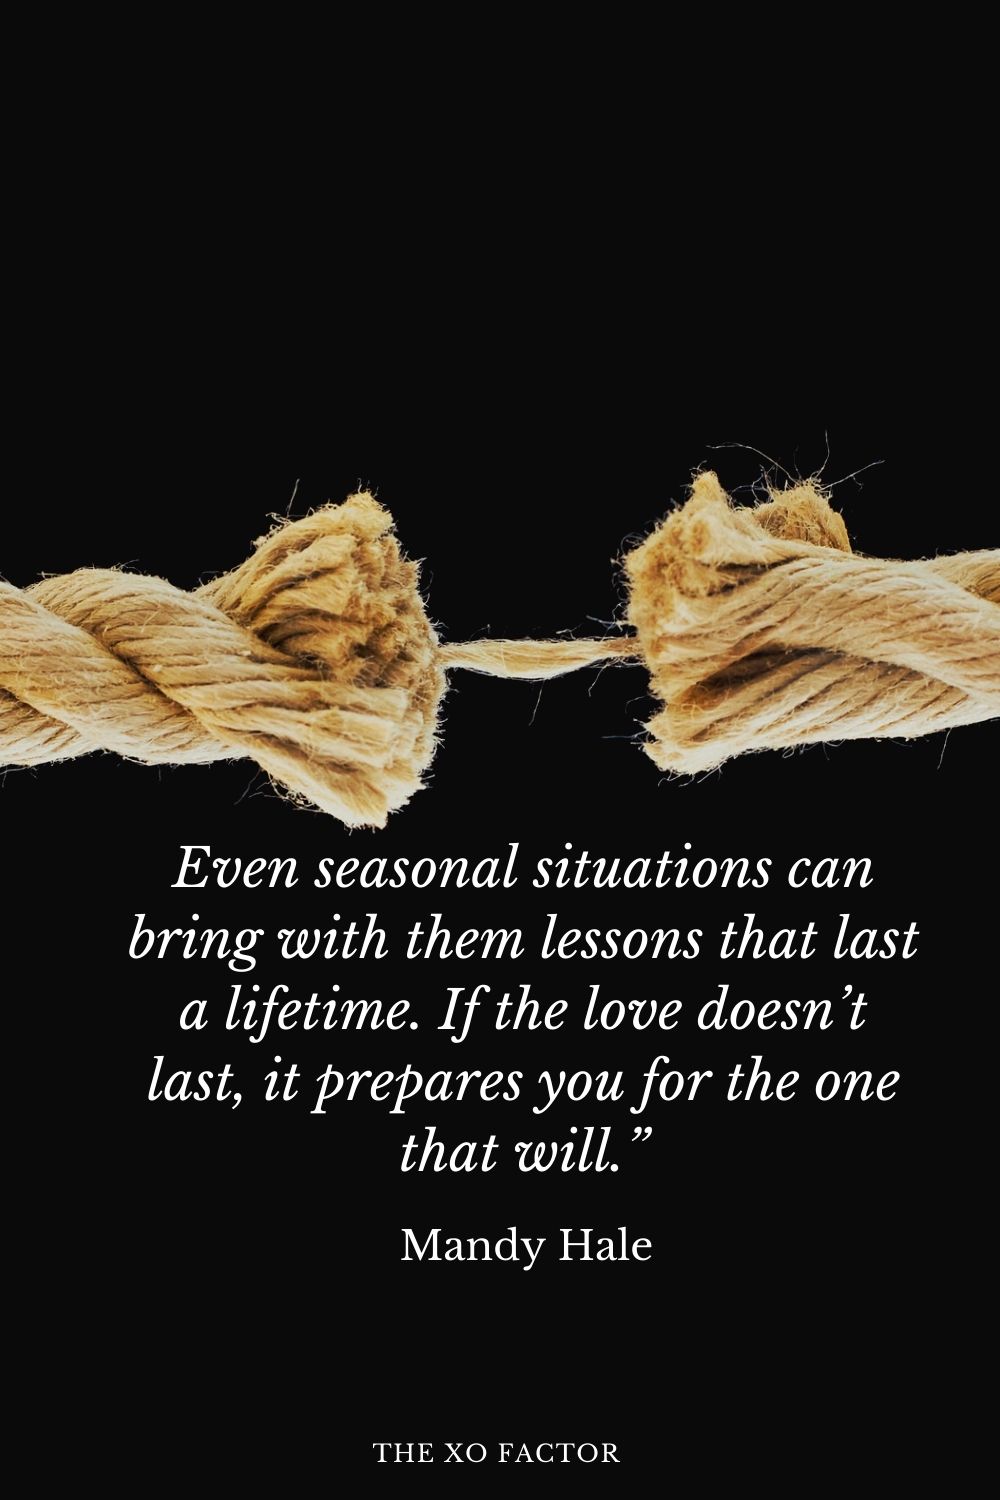 Even seasonal situations can bring with them lessons that last a lifetime. If the love doesn’t last, it prepares you for the one that will.” Mandy Hale